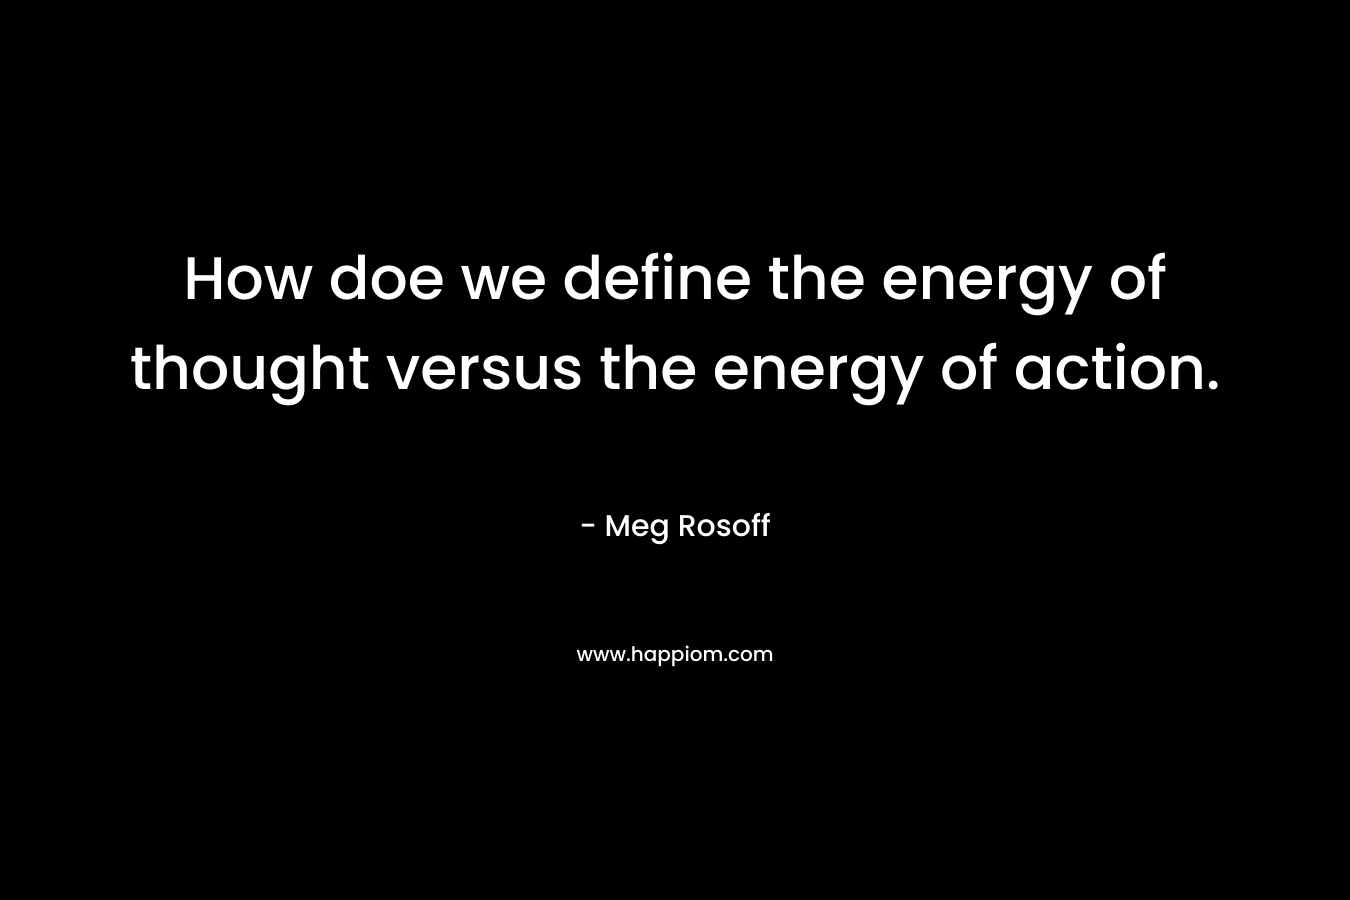 How doe we define the energy of thought versus the energy of action. – Meg Rosoff